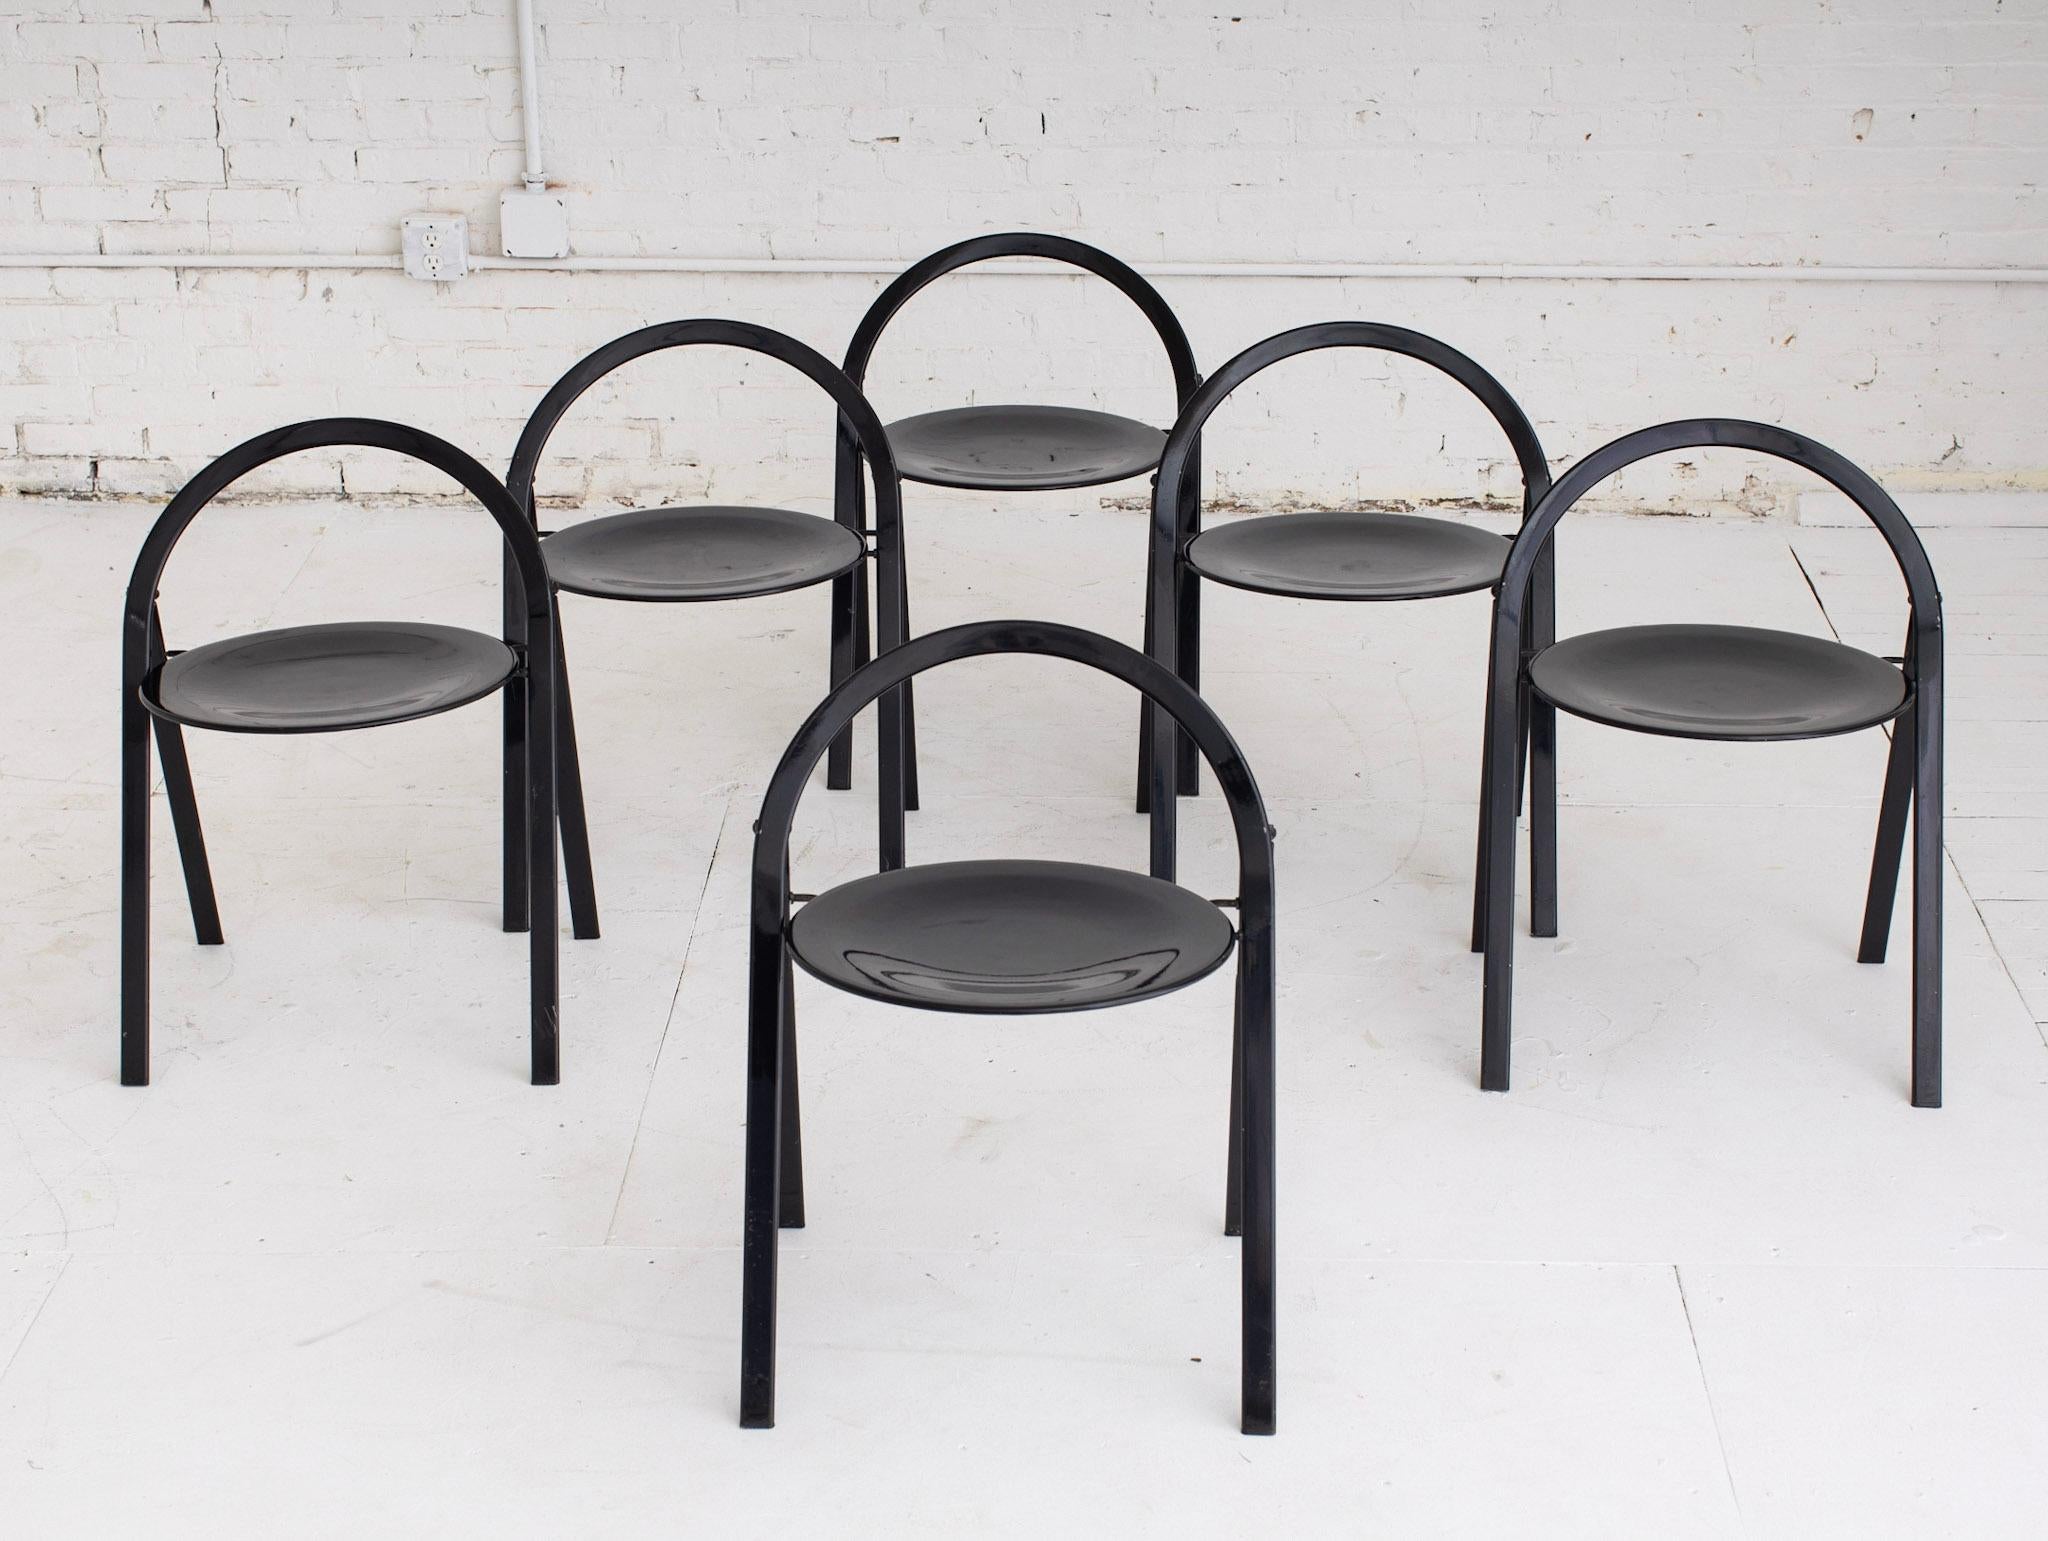 A set of 6 Giorgio Cattelan for Cidue folding chairs. Sleek round resign in black enamel. 

Cattelan was born in Thiene, Italy into a family of craftsmen. Prior to founding the luxury furniture company Cattelan Italia in 1979 with his wife, Silvia